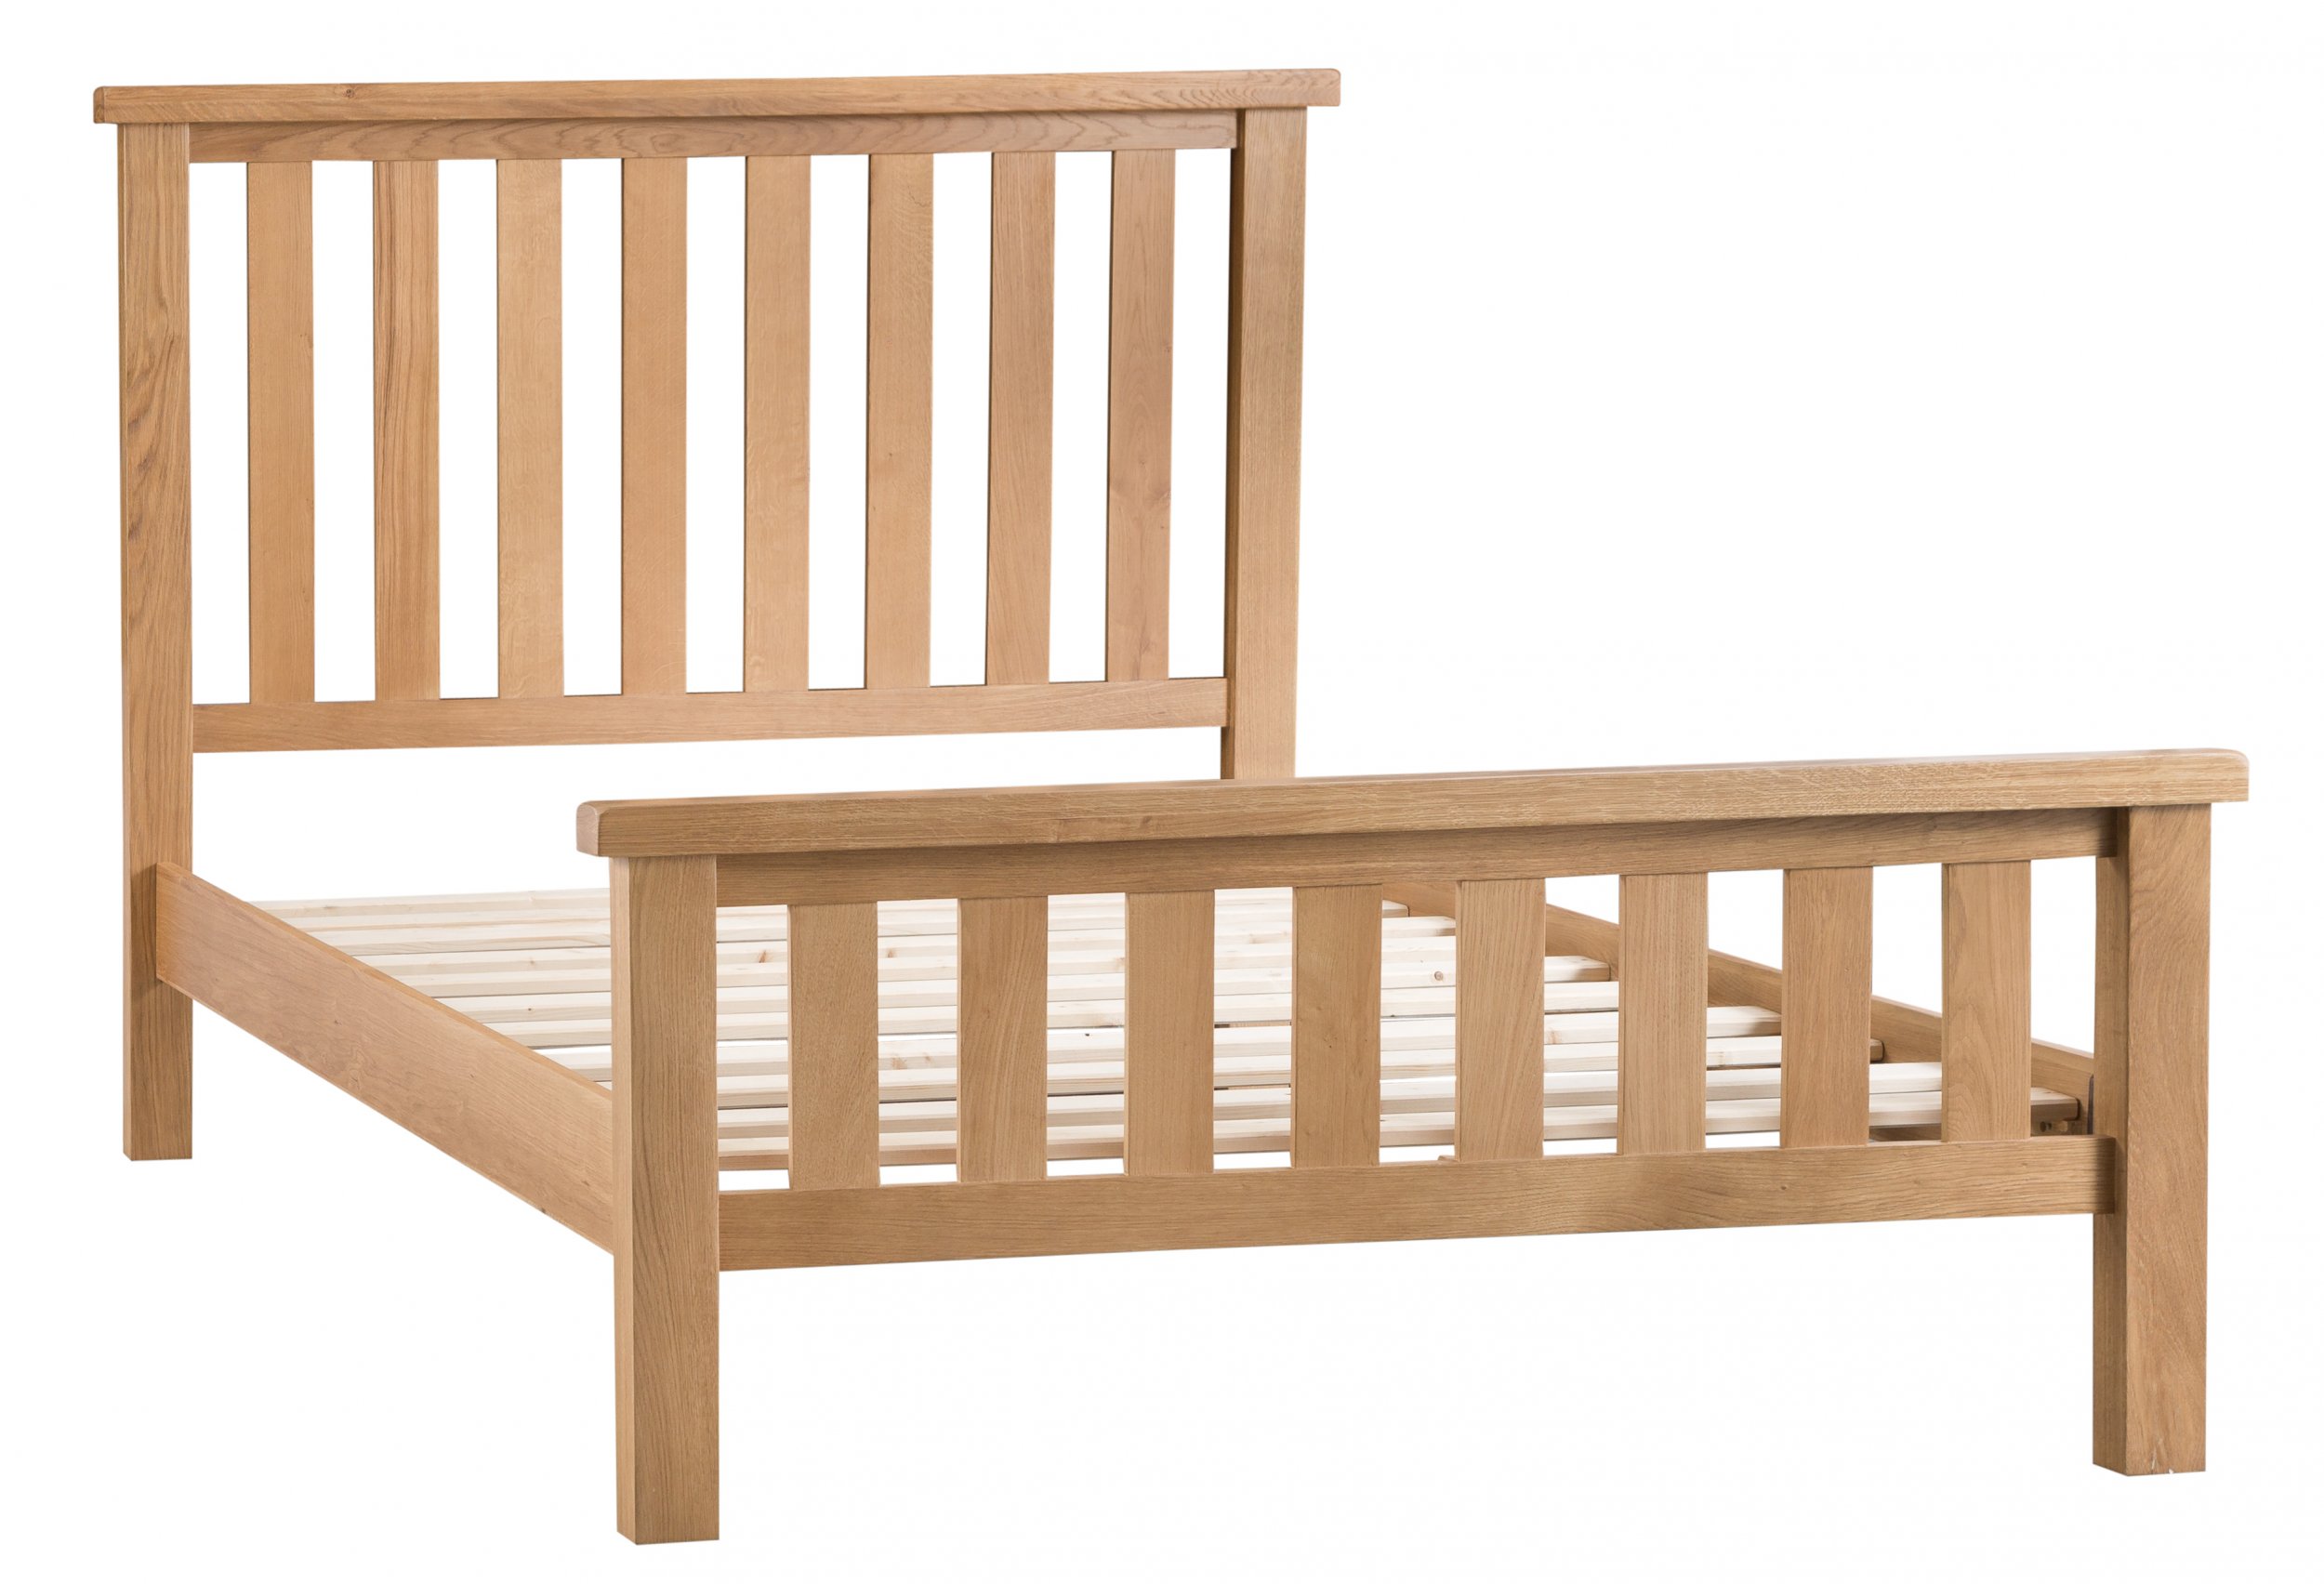 Classic Oakmont Bedroom Super King Size Bed Frame The Clearance Zone